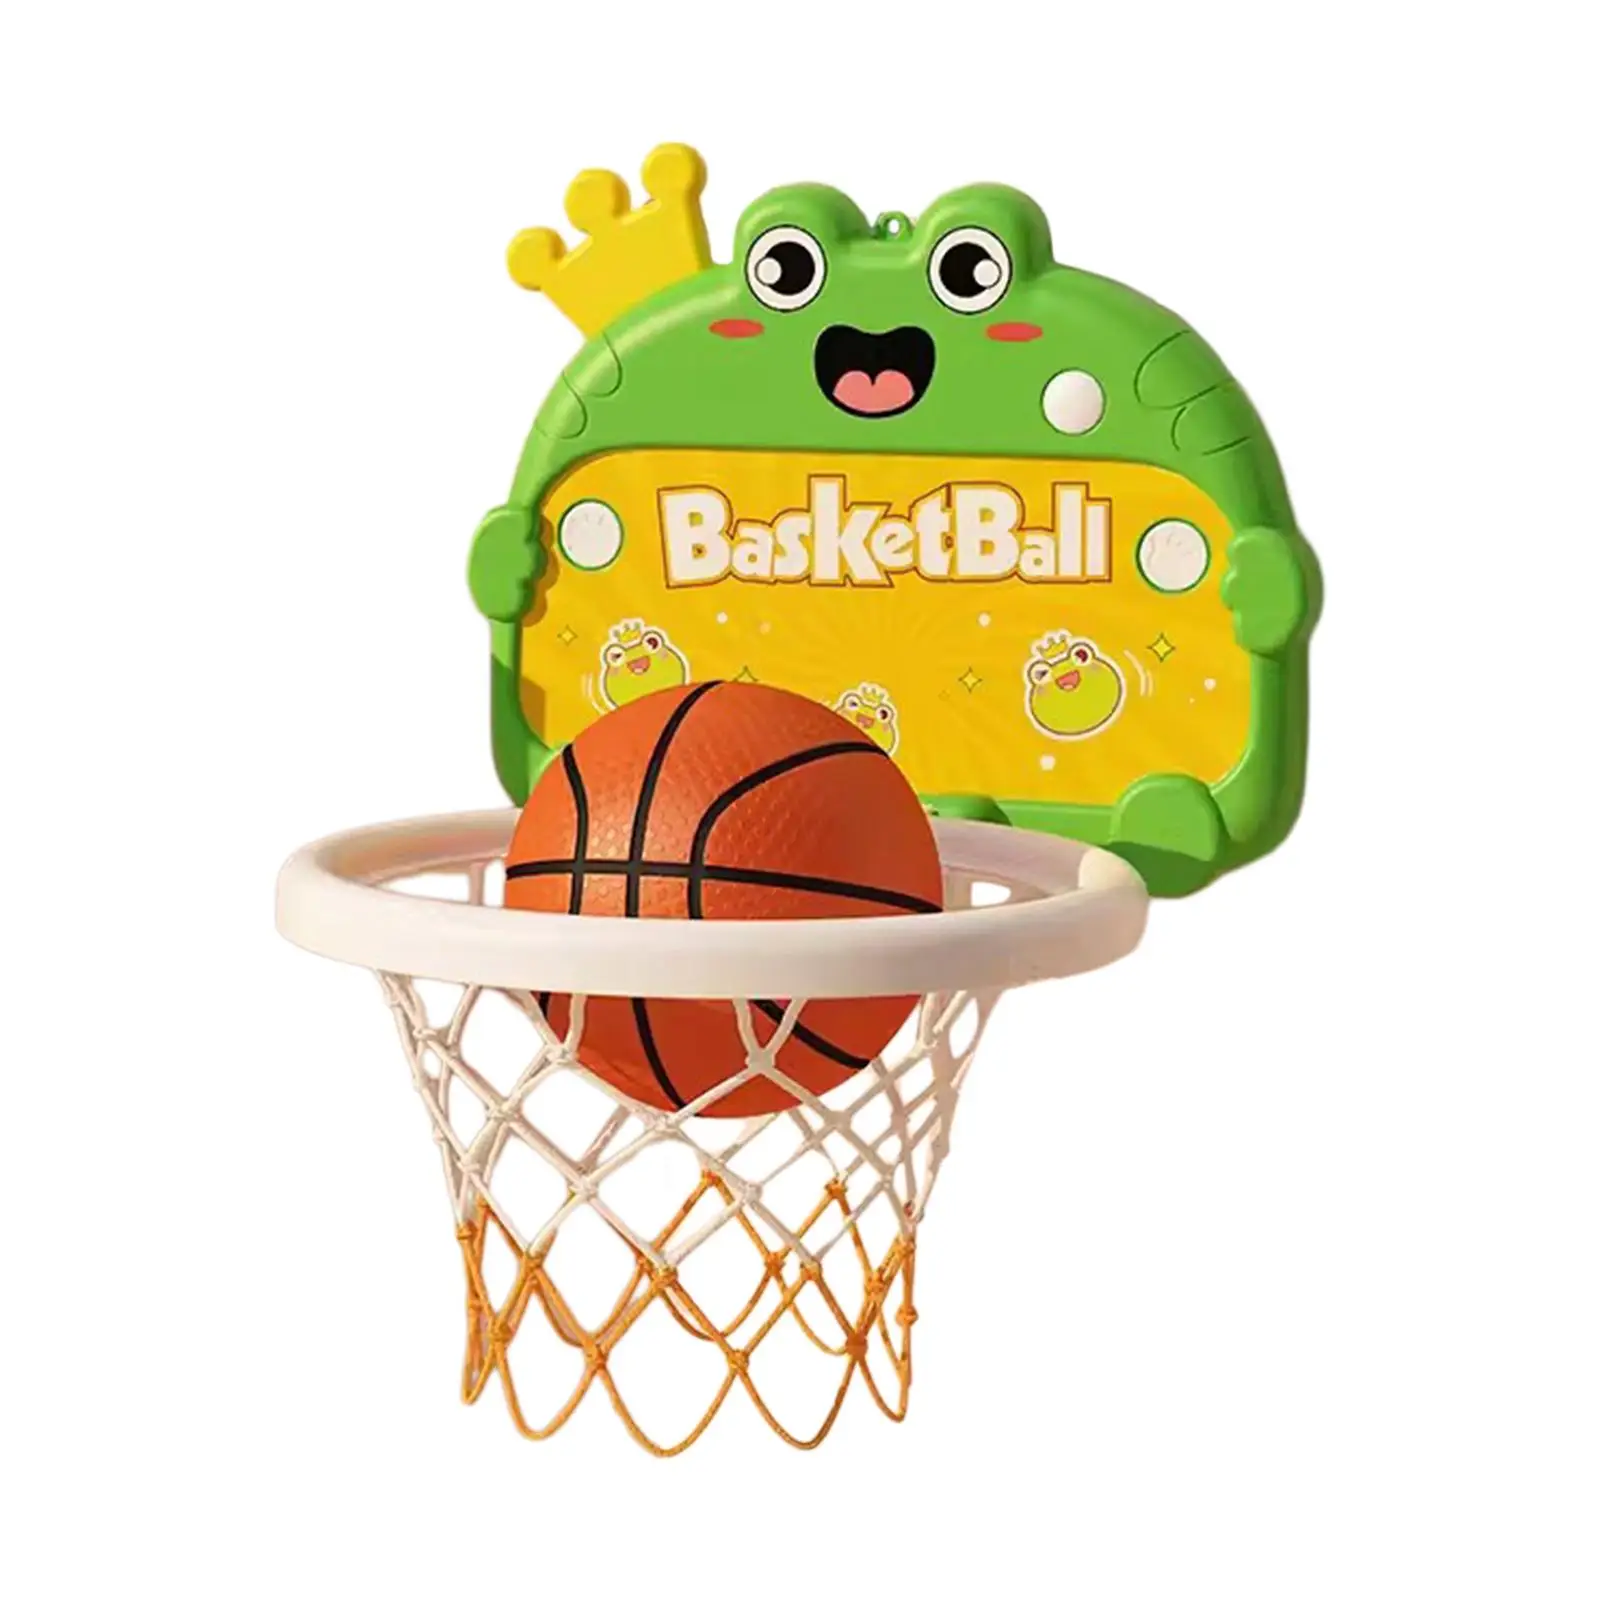 Mini Basketball Hoop Set Boys Girls Ages 2 3 4 Year Old Educational Easy to Install with Basketball for Living Room Door Wall